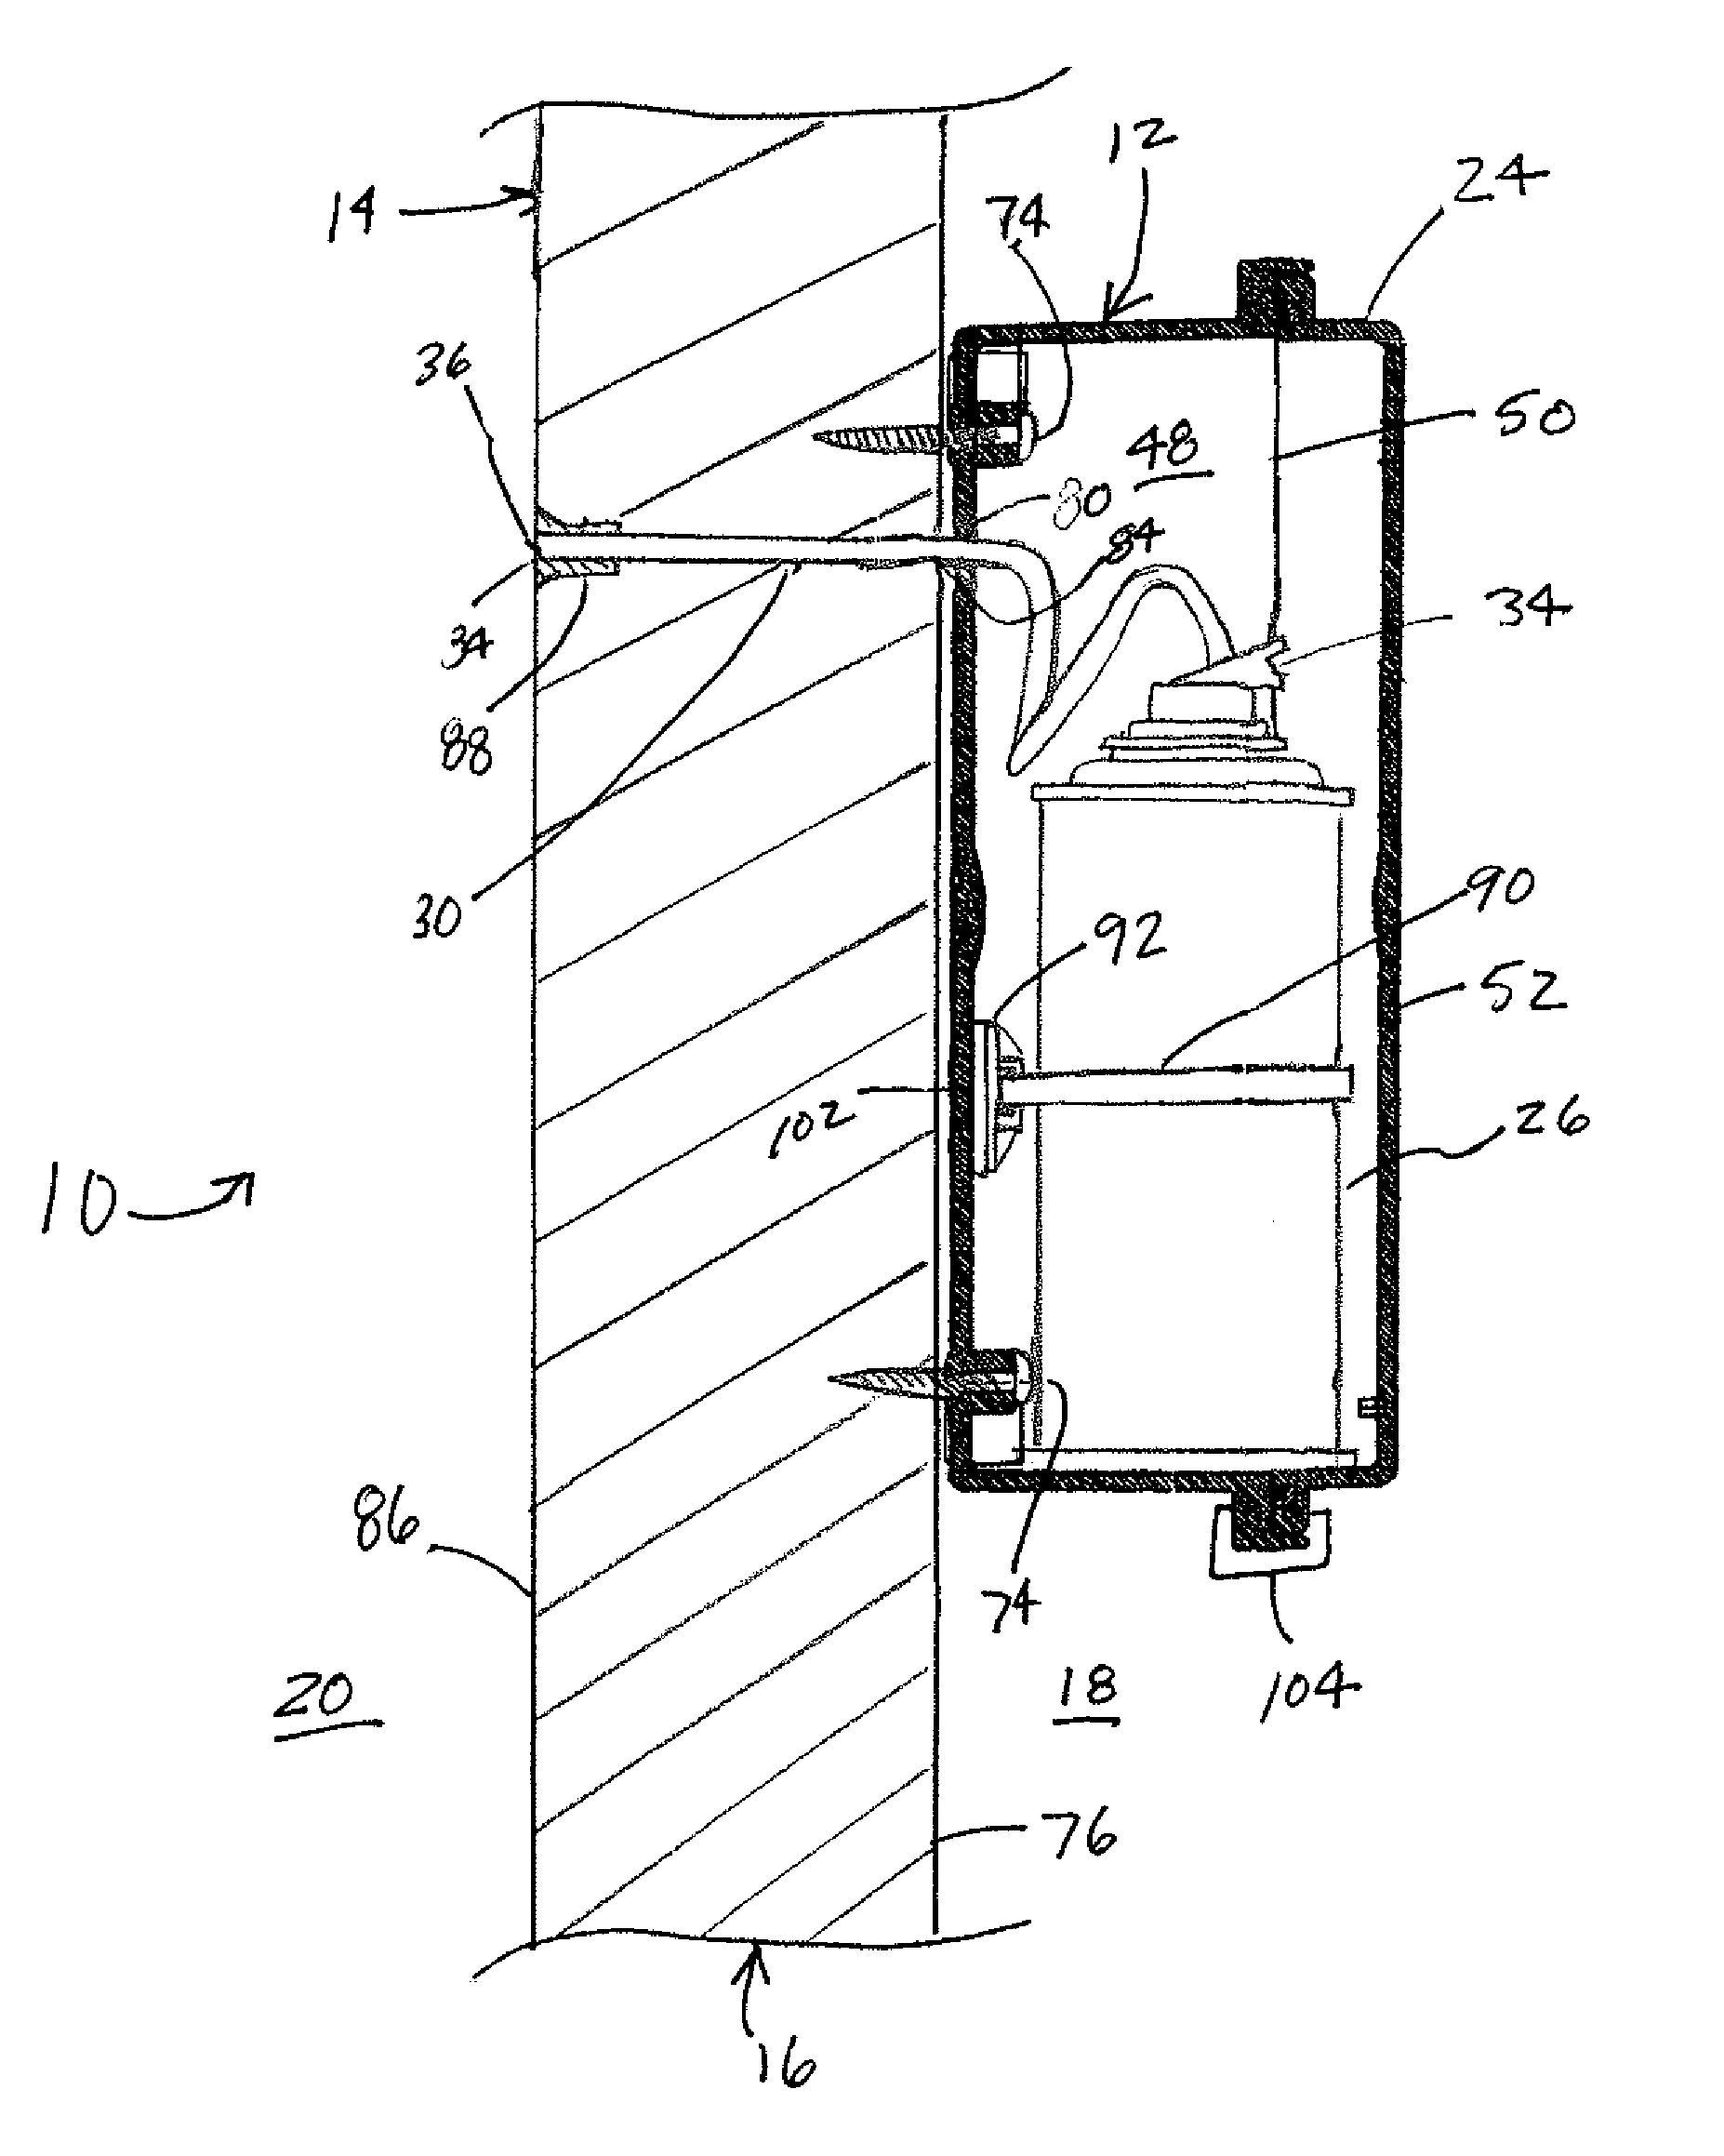 Wall-mounted nonlethal device for defending against intruders